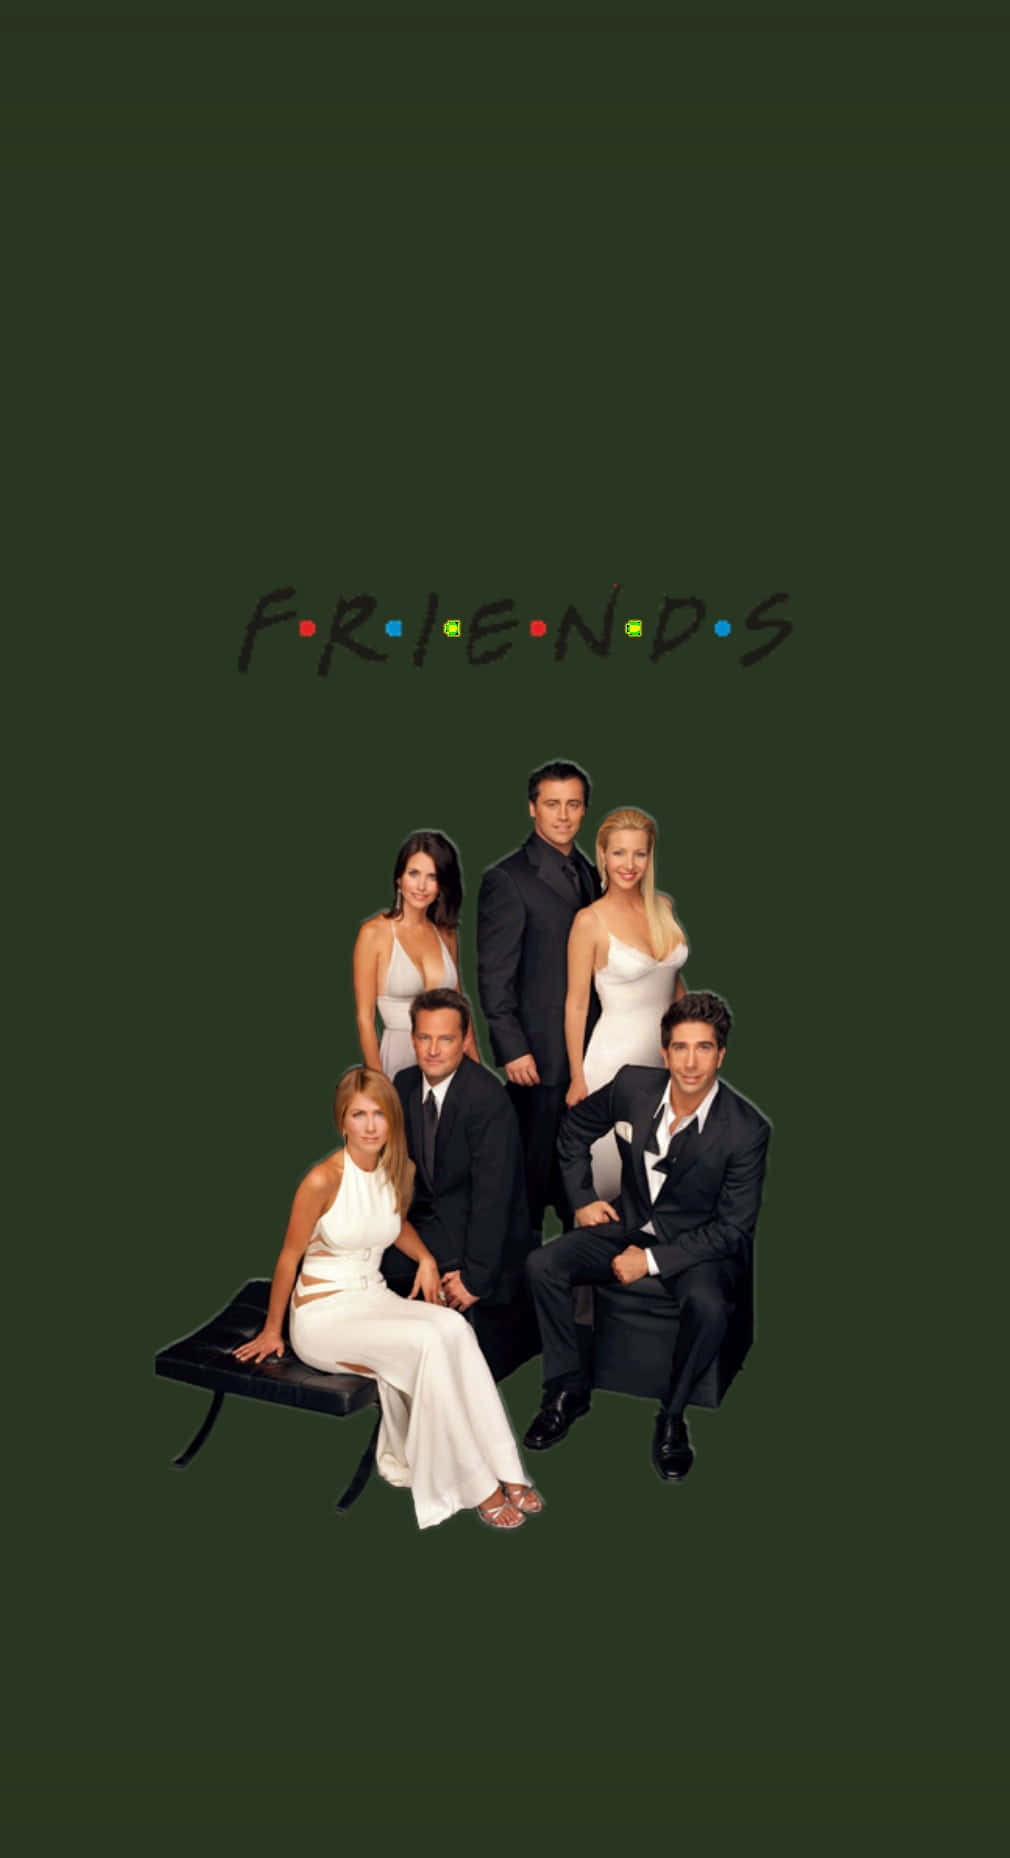 Friends Iphone Formal Clothes Wallpaper